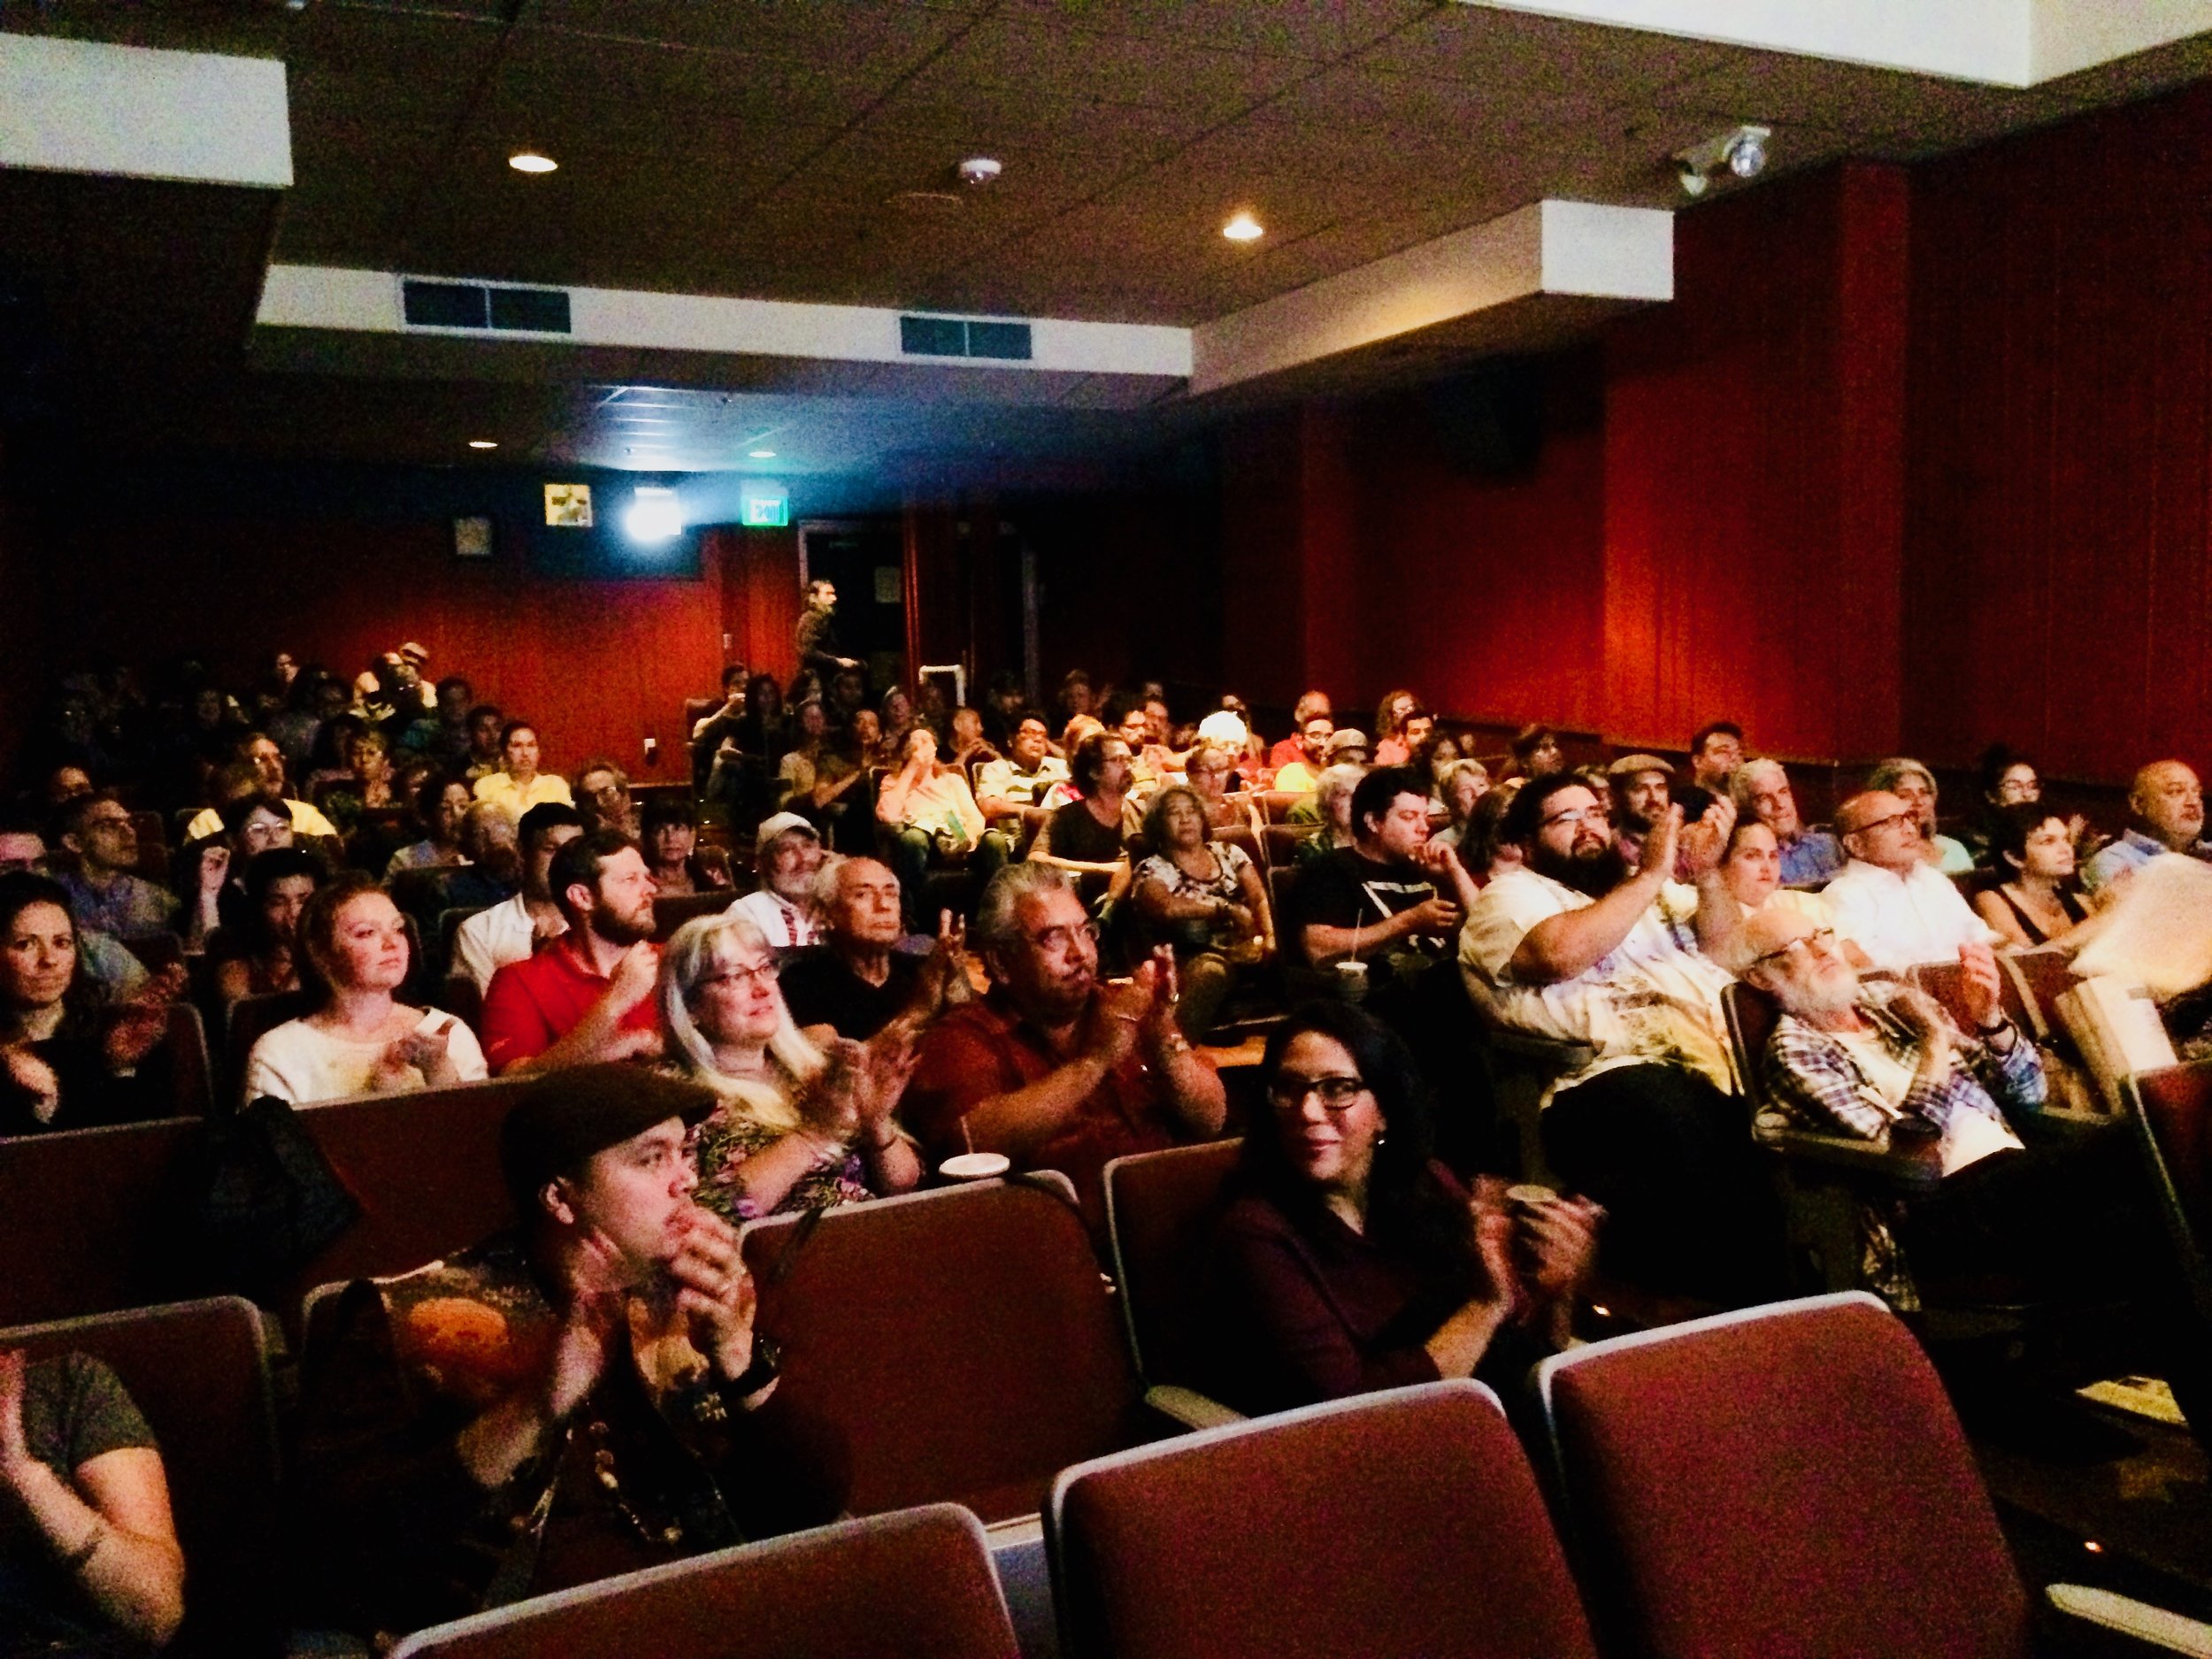  Audience members fill the house at the San Francisco Latino Film Festival premier of “The Rise and Fall of the Brown Buffalo.” 